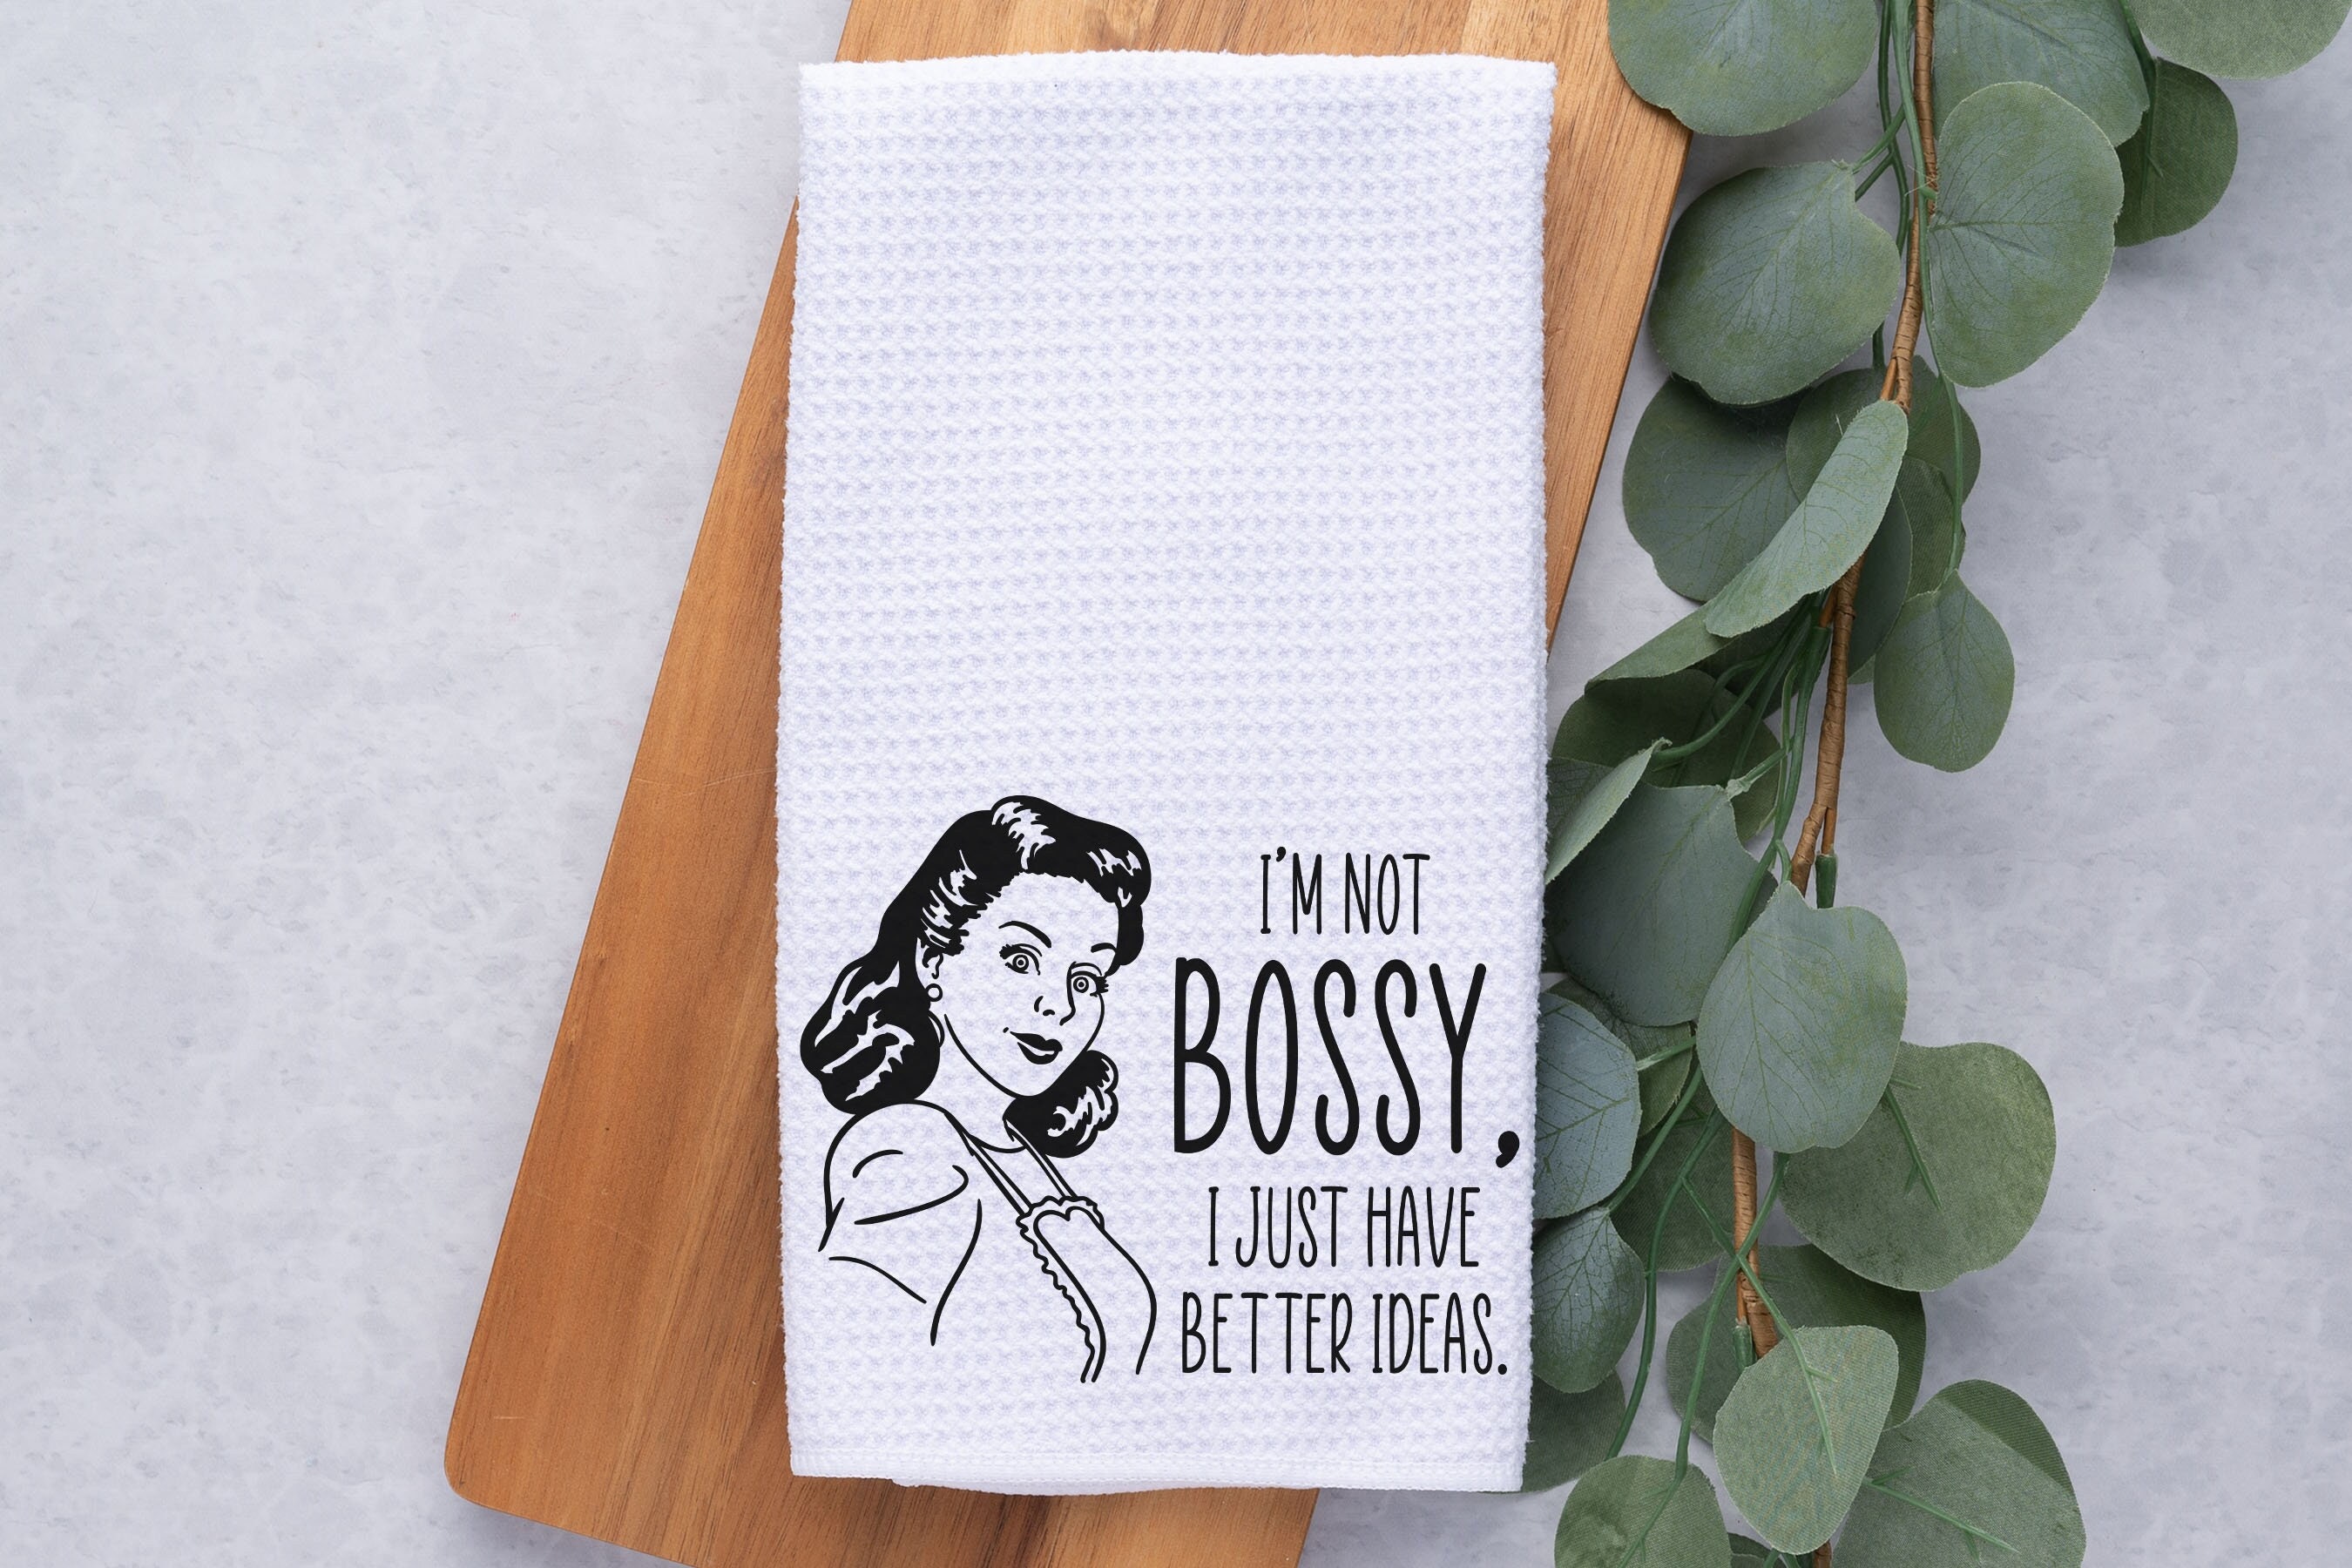 CintBllTer Funny Kitchen Towel, Funny Dish Towel, Funny Hand Towel, Fun Kitchen  Towels, Tea Towels Funny, with Sayings, Decorative, Cute, Sarcastic, Decor,  